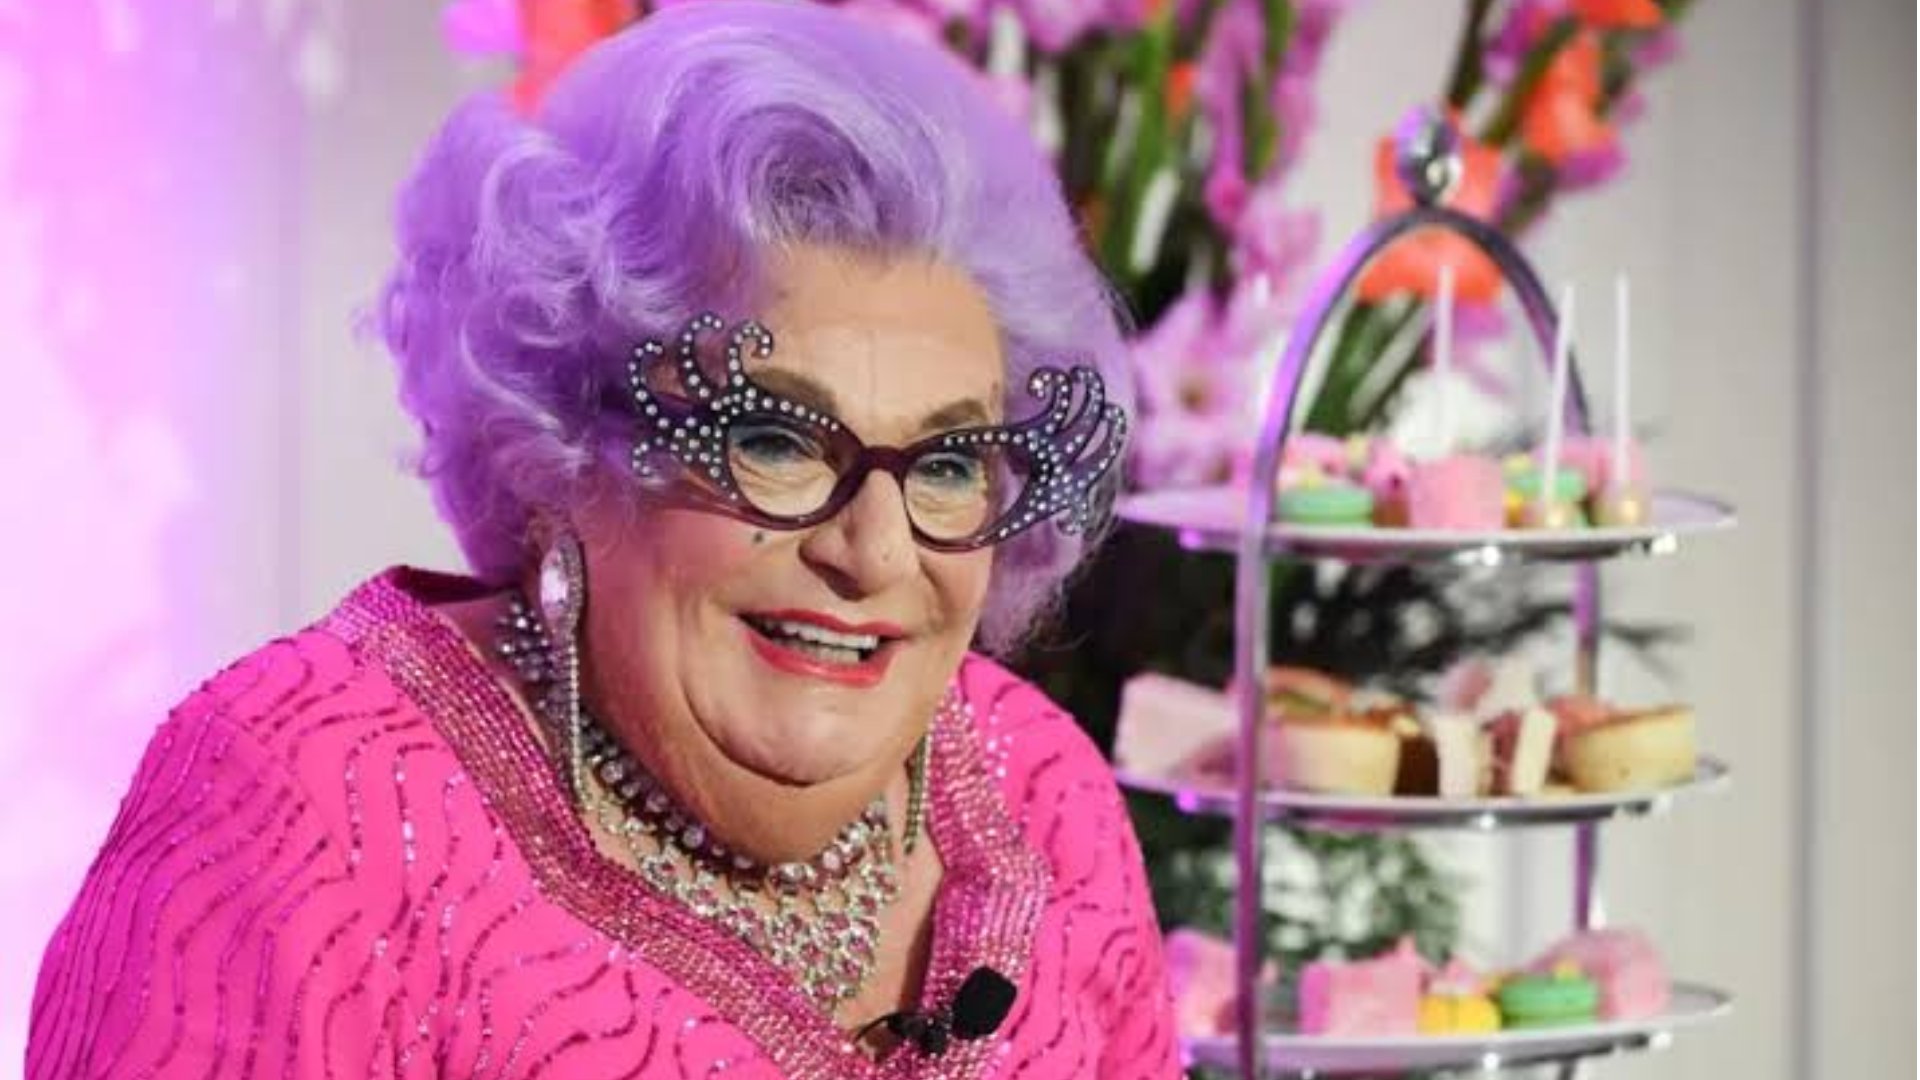 Australian Comedian Barry Humphries Died News: Dame Edna Everage comedian dies at 89